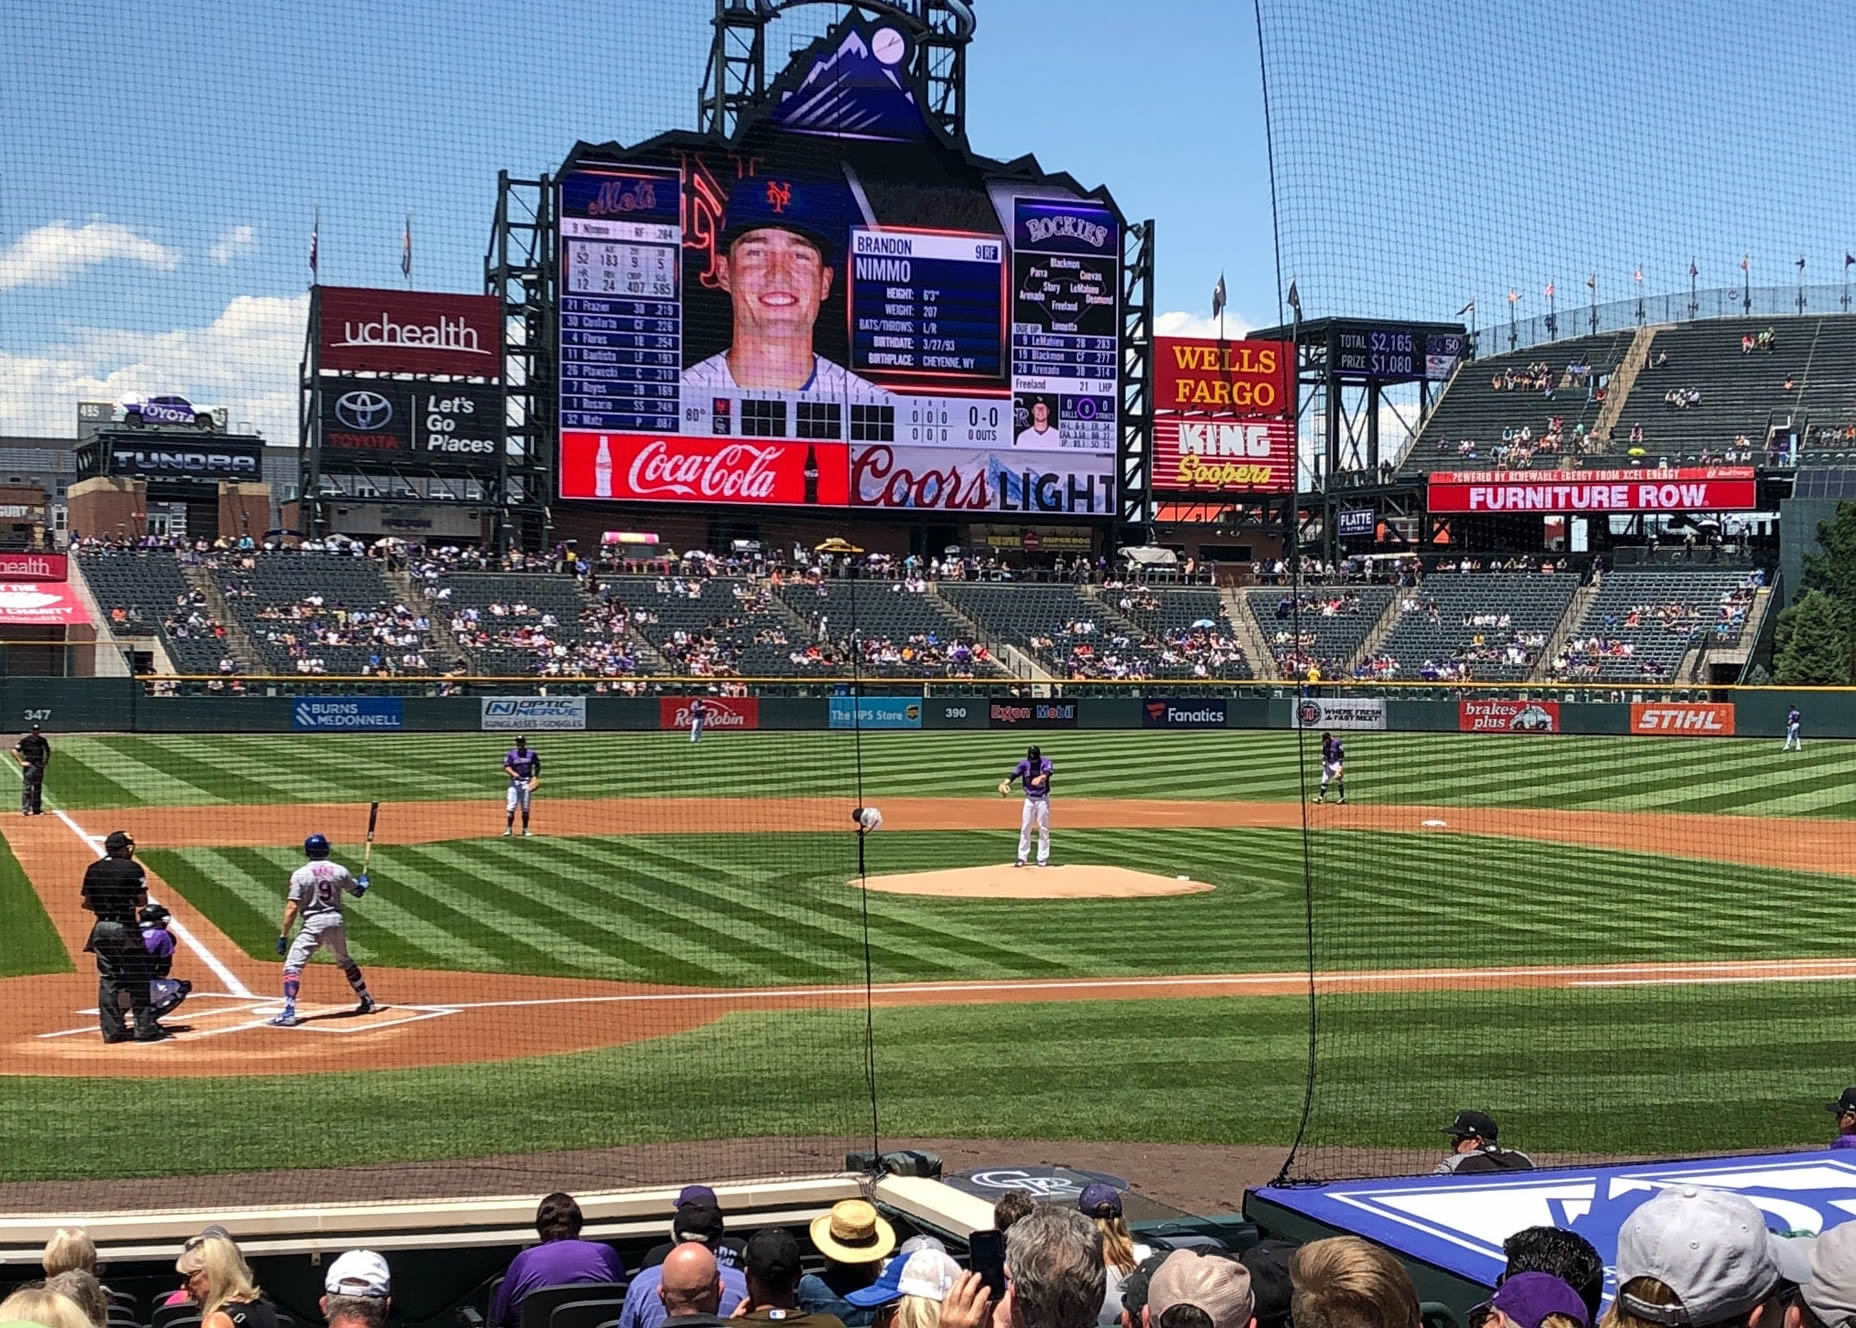 Section 126 at Coors Field 